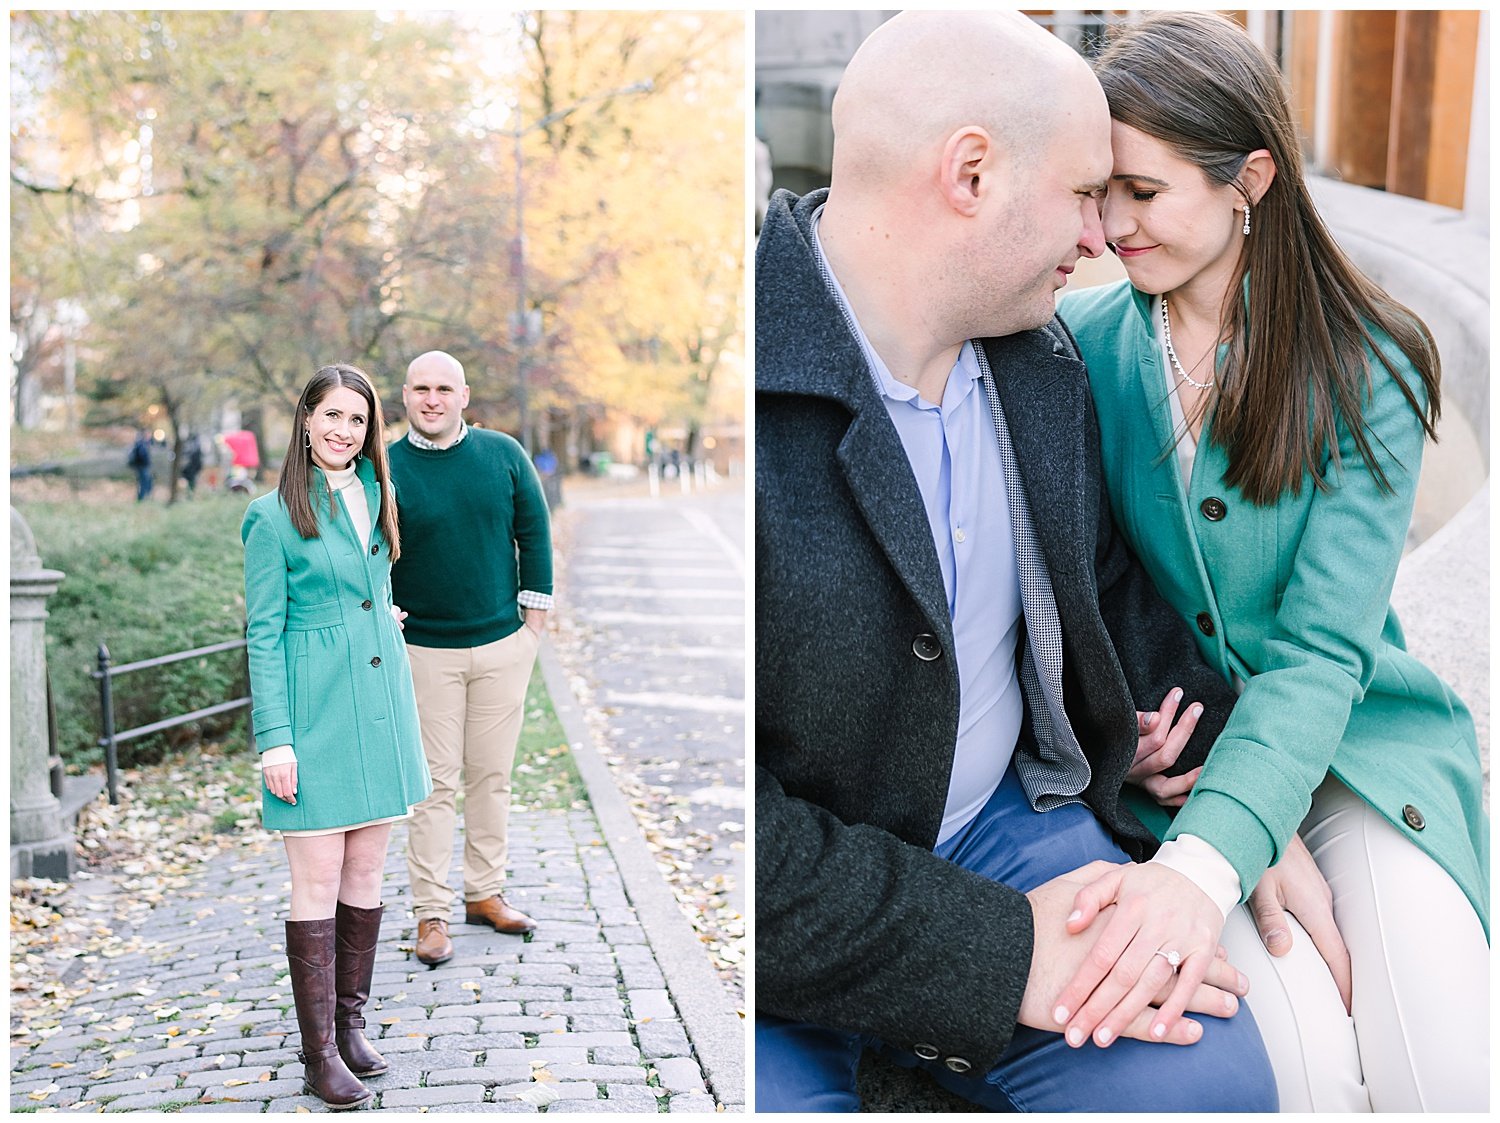 Kristin and Marc Engagement Session_2013.jpg